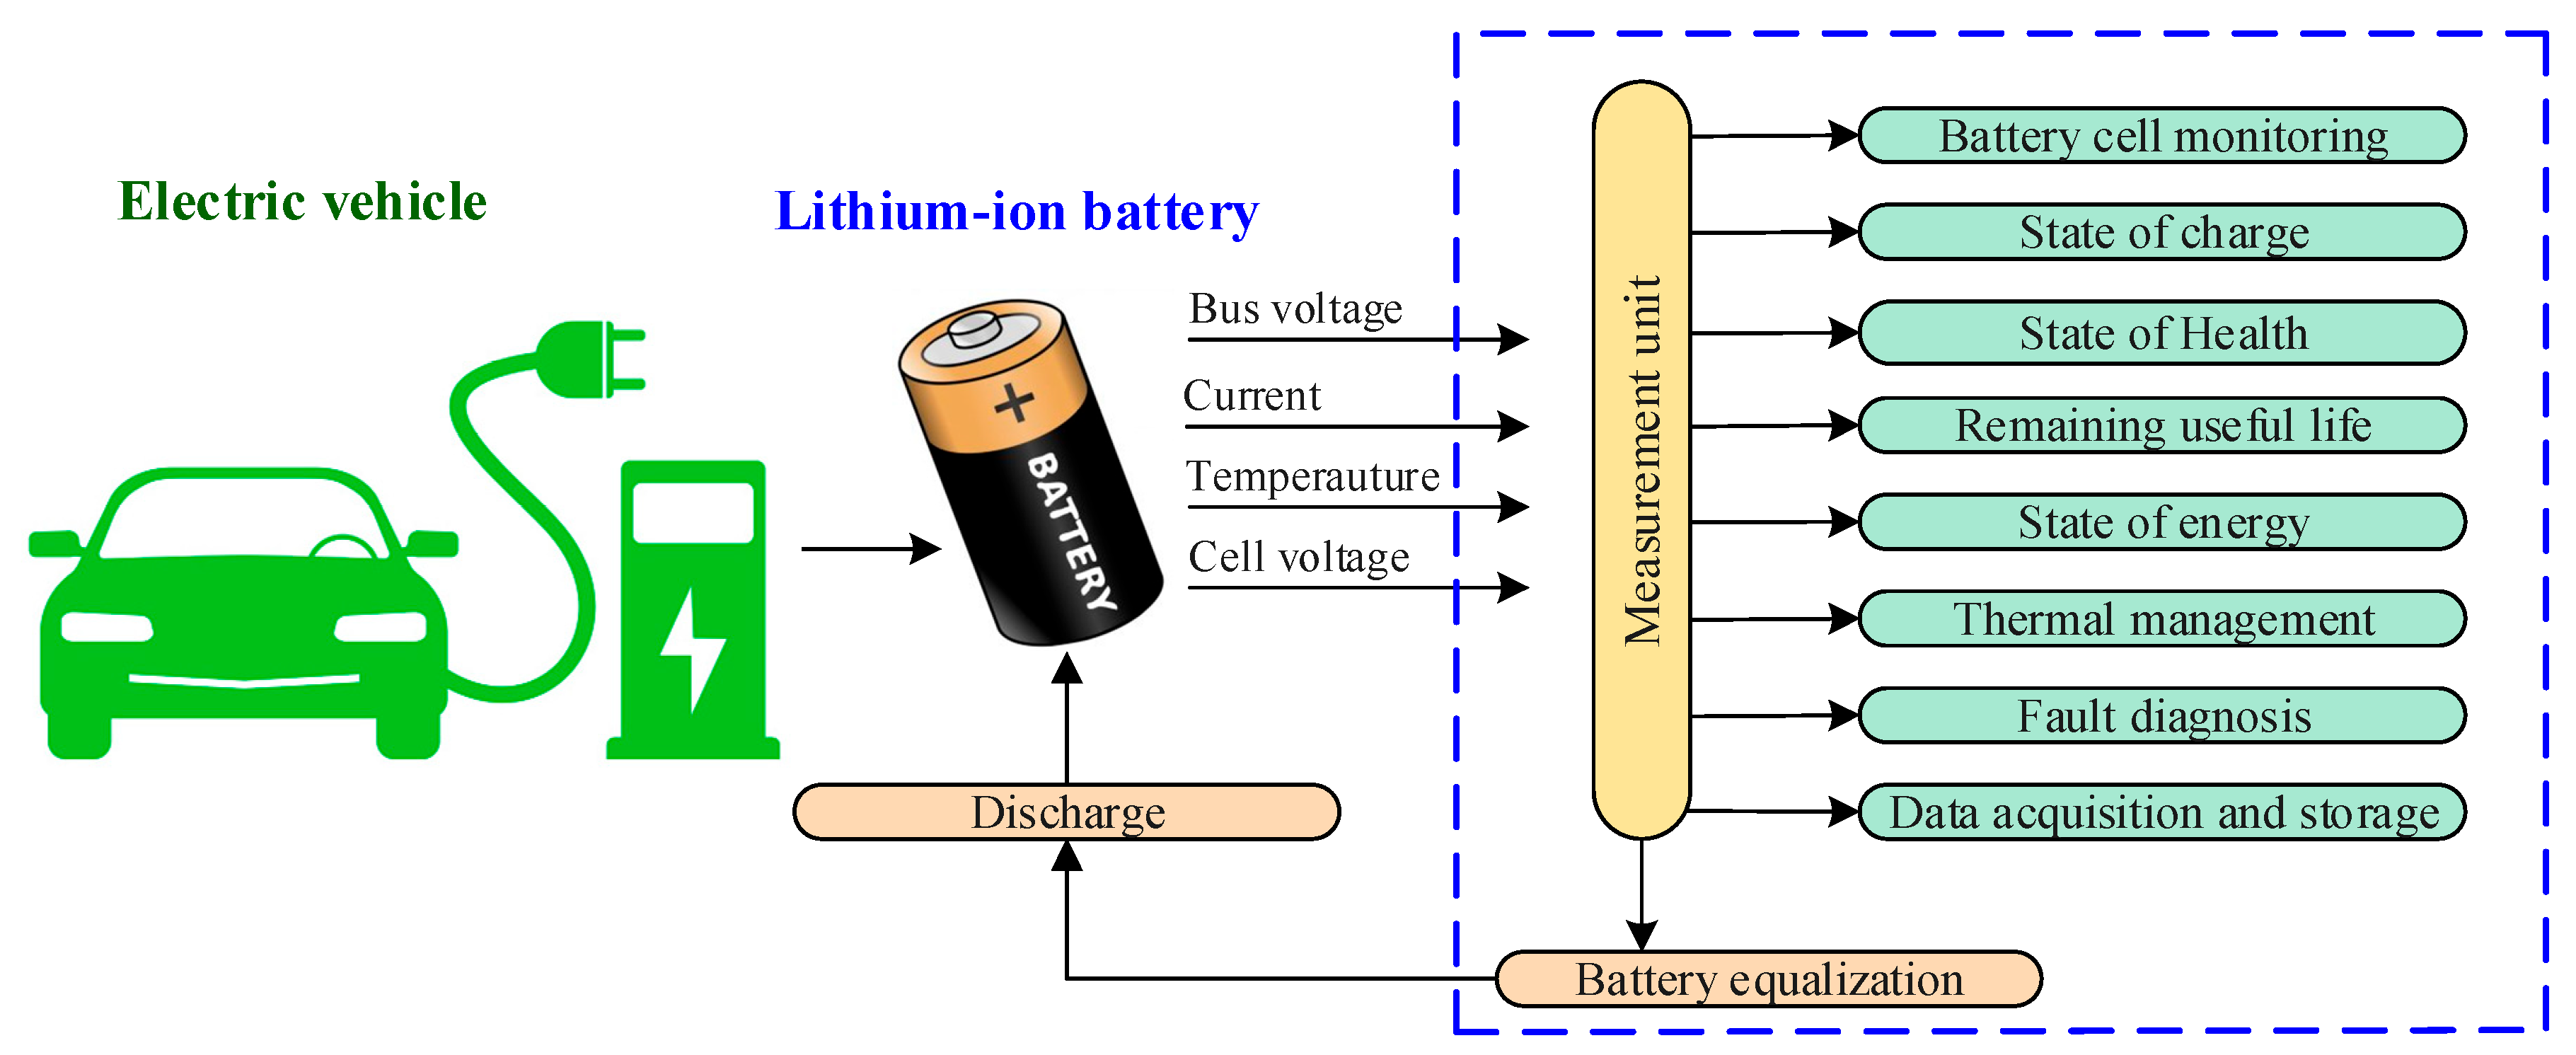 Vittig professionel Fakultet Batteries | Free Full-Text | Battery Management, Key Technologies, Methods,  Issues, and Future Trends of Electric Vehicles: A Pathway toward Achieving  Sustainable Development Goals